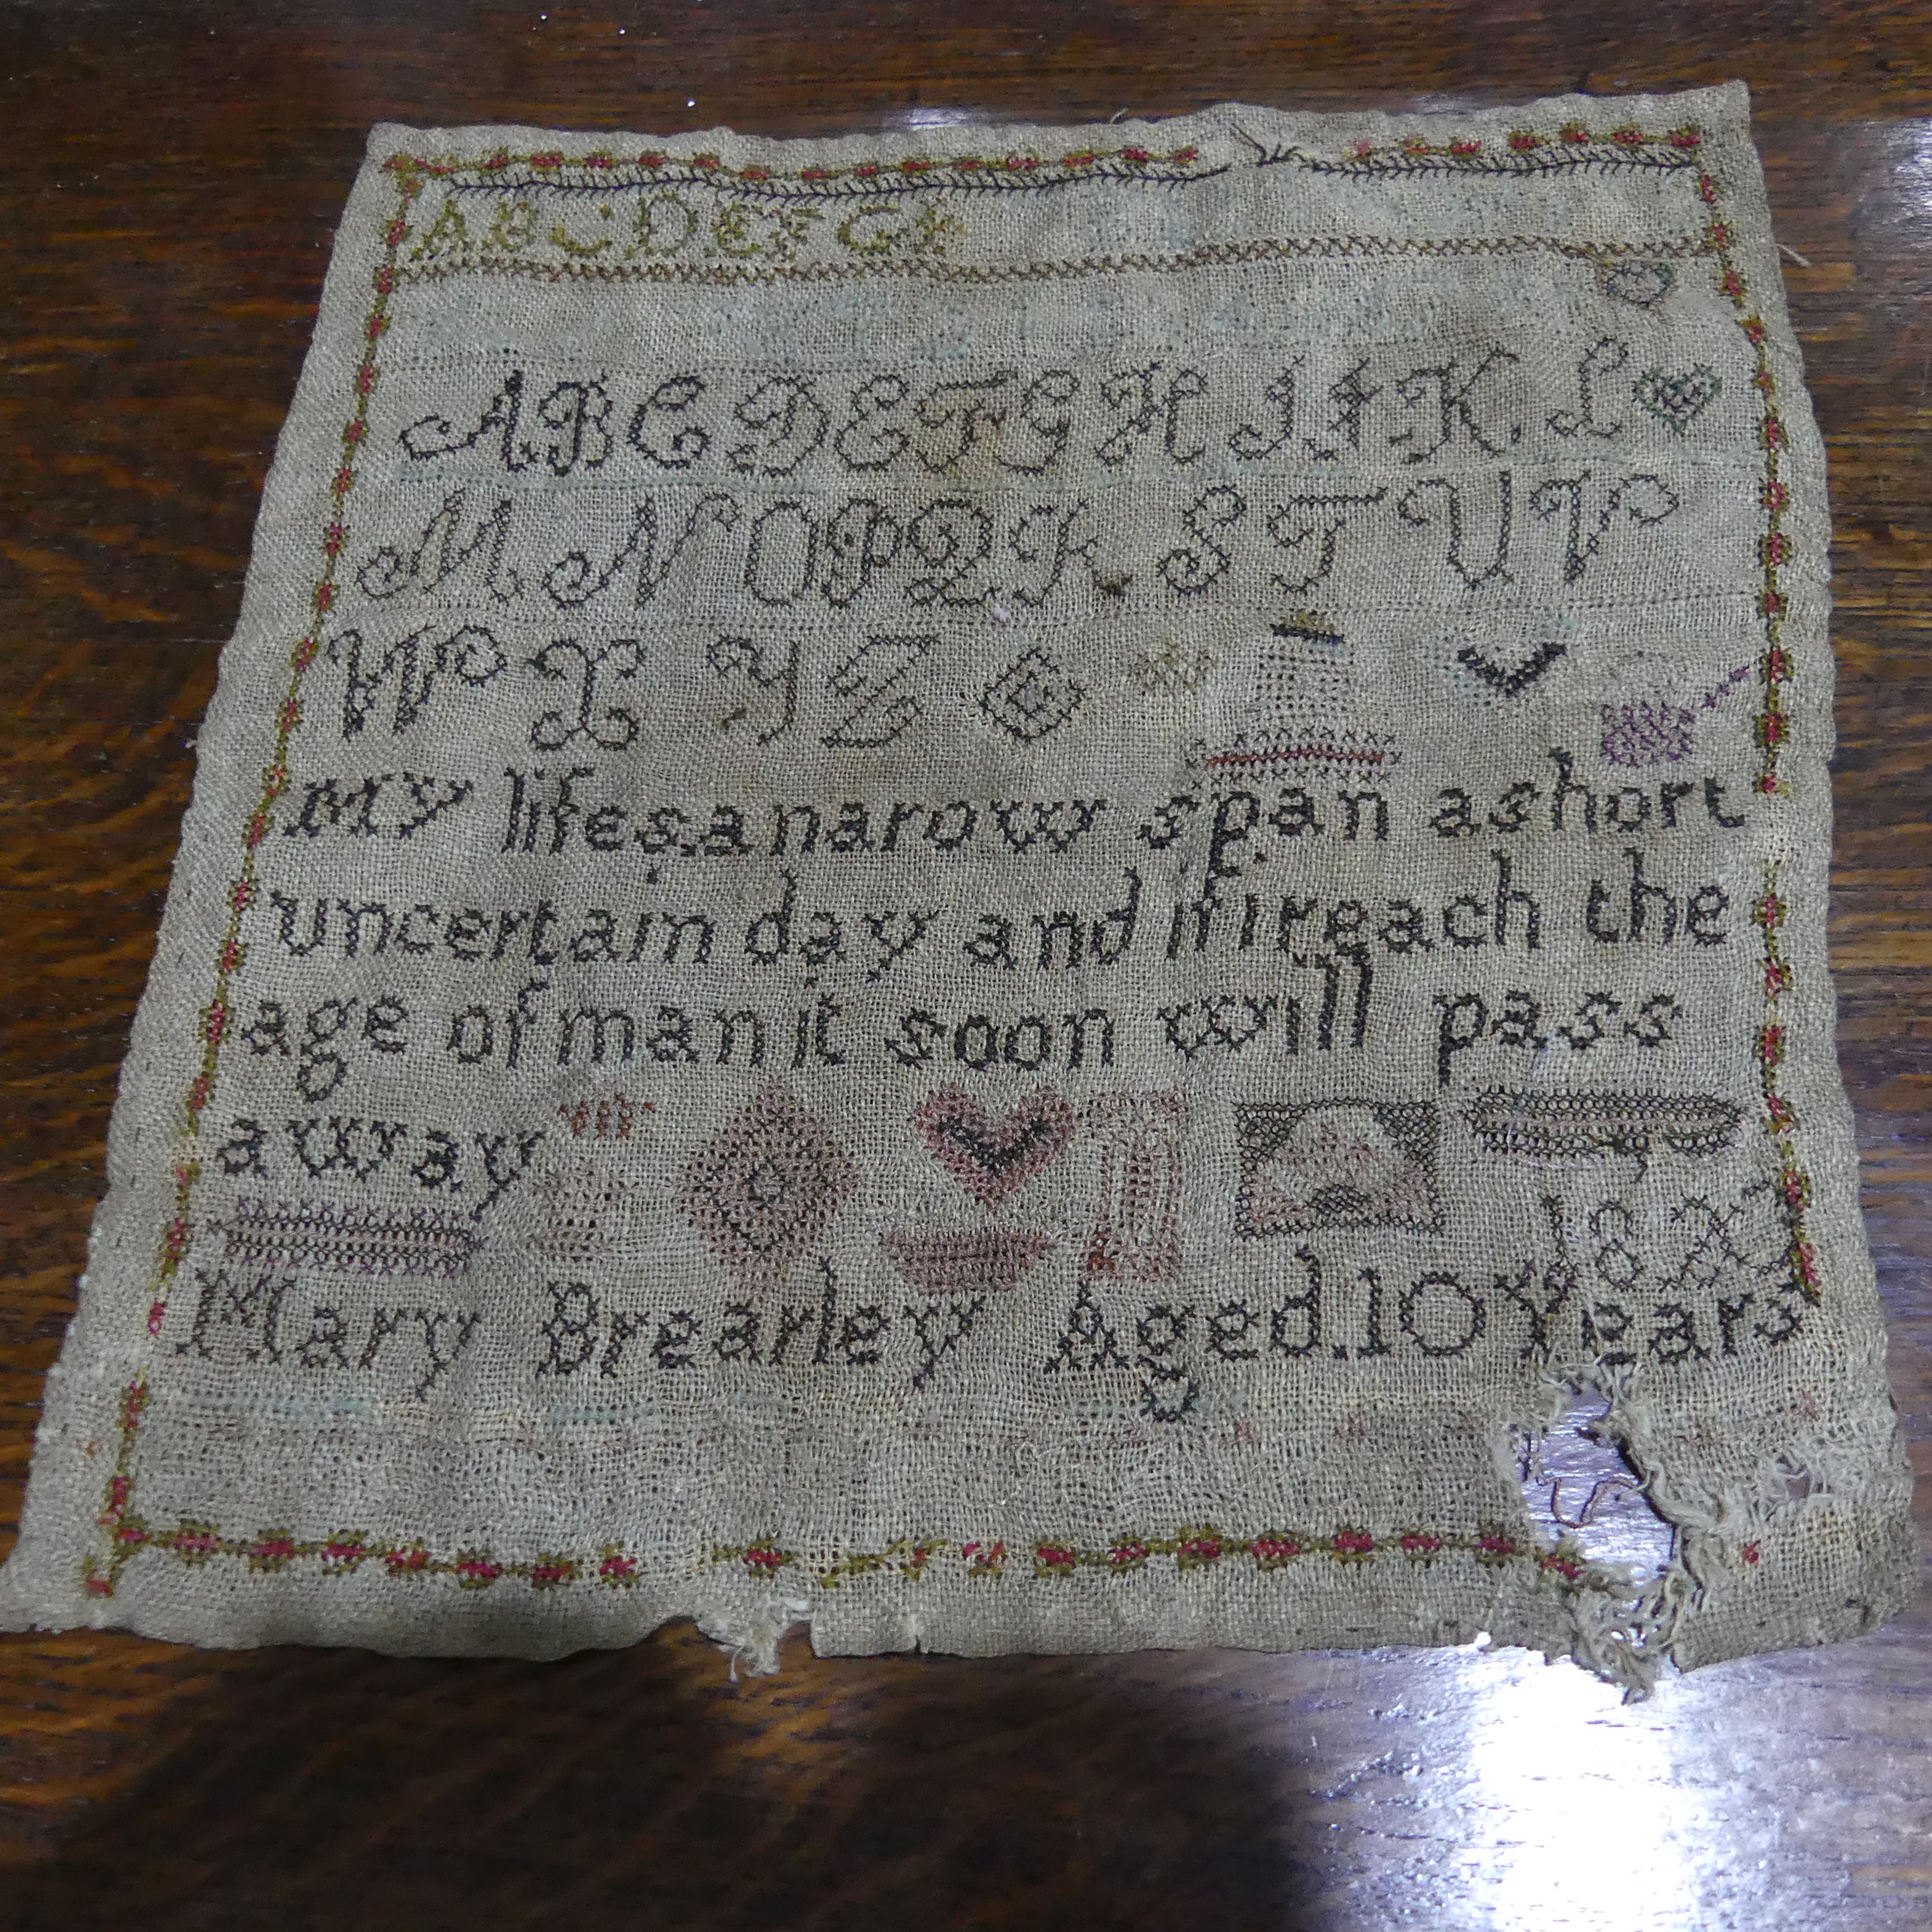 Three early Victorian needlework samplers by Hanah, Sarah and Mary Brearly dated 1812, 1817 and 1820 - Image 2 of 5